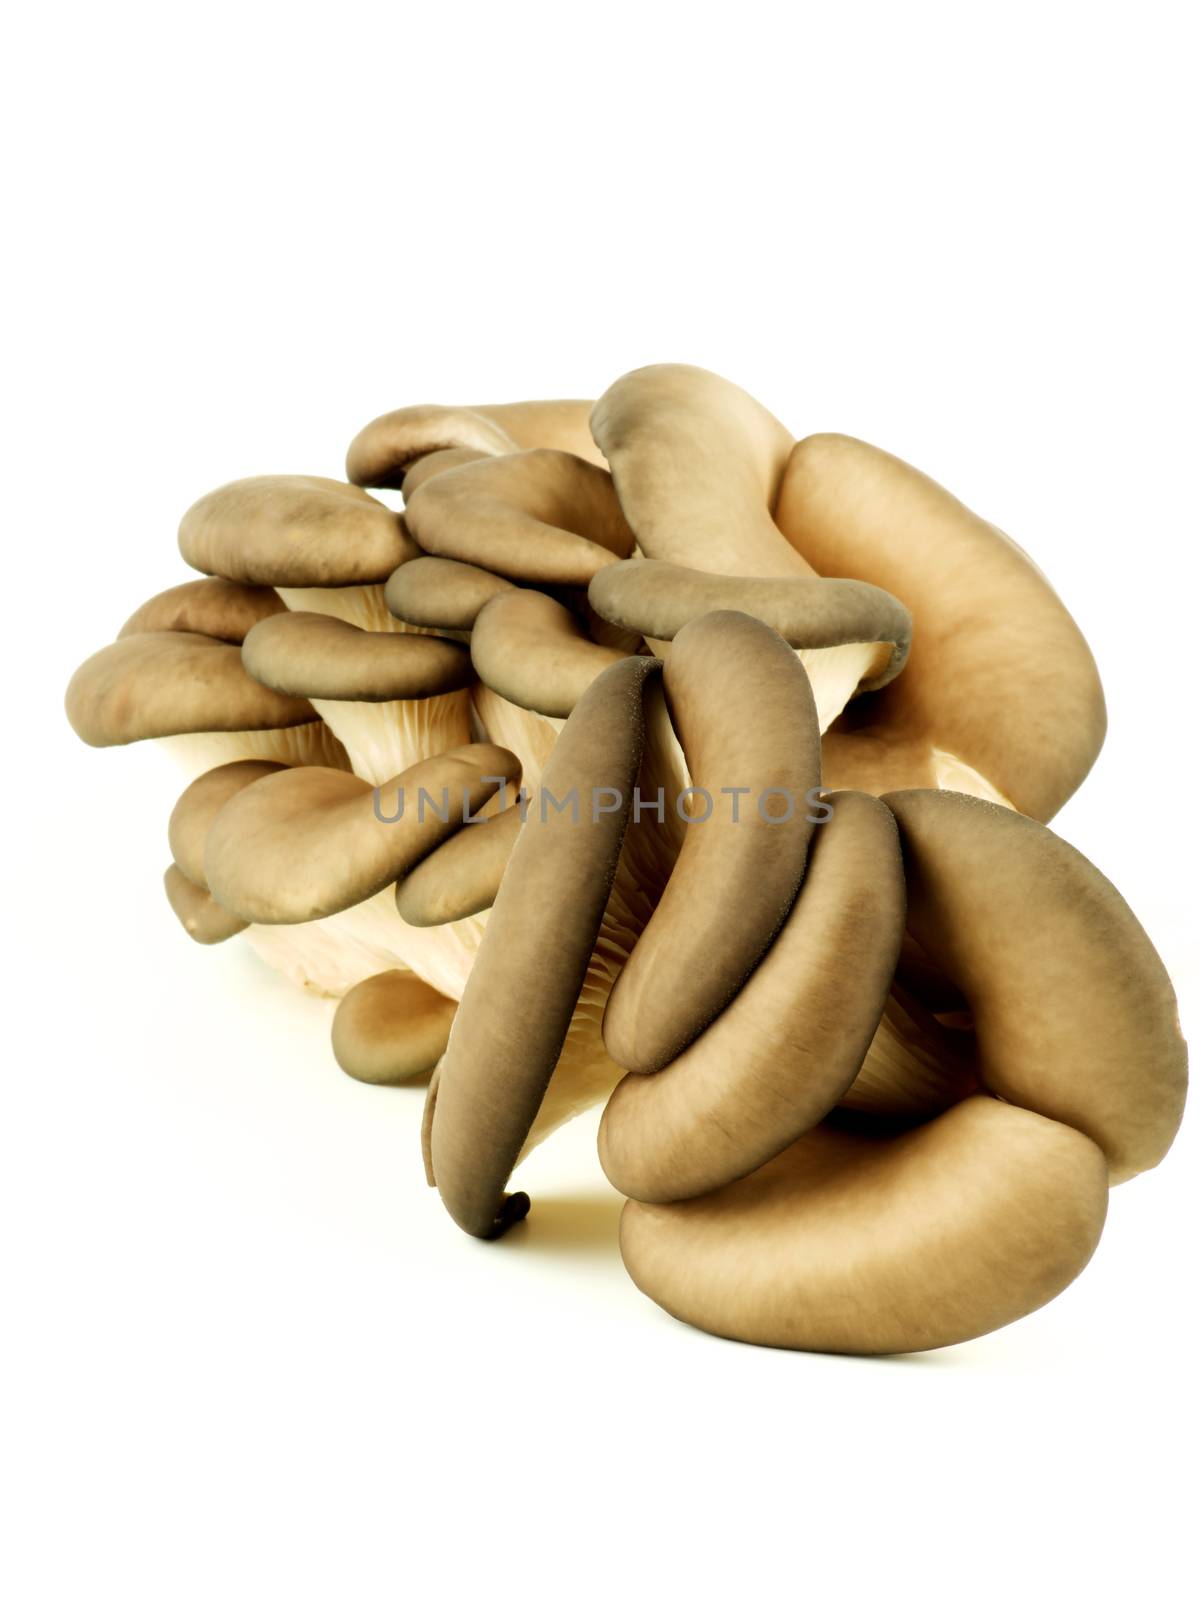 Bunch of Fresh Raw Oyster Mushrooms isolated on White background